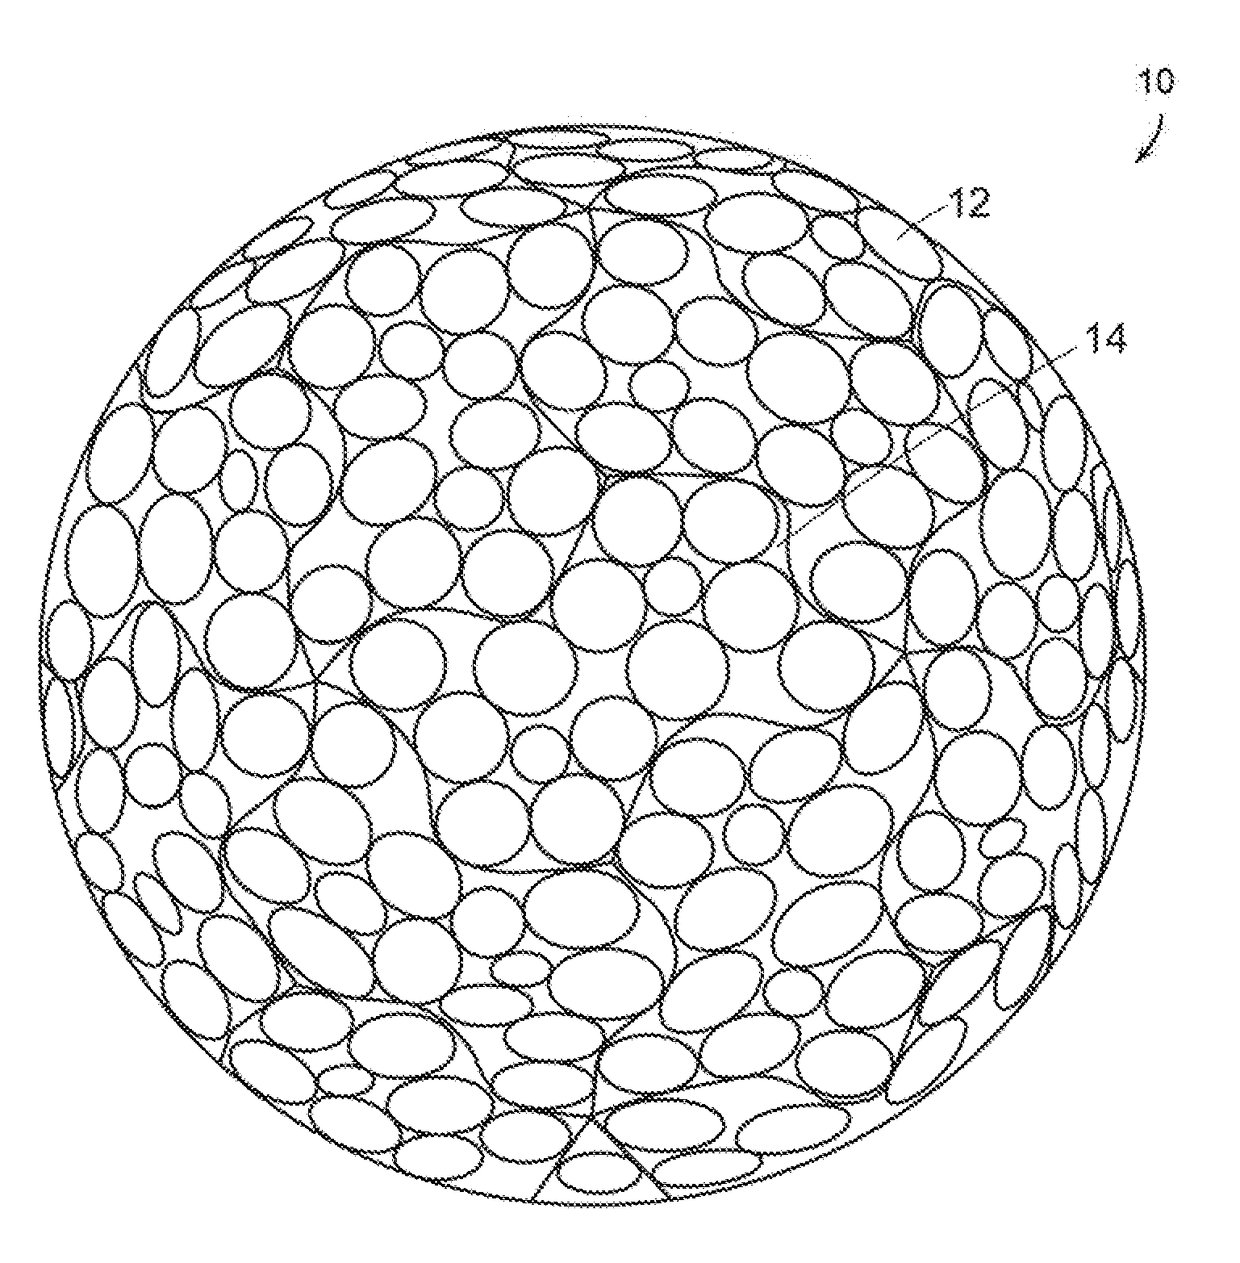 Dimple patterns for golf balls